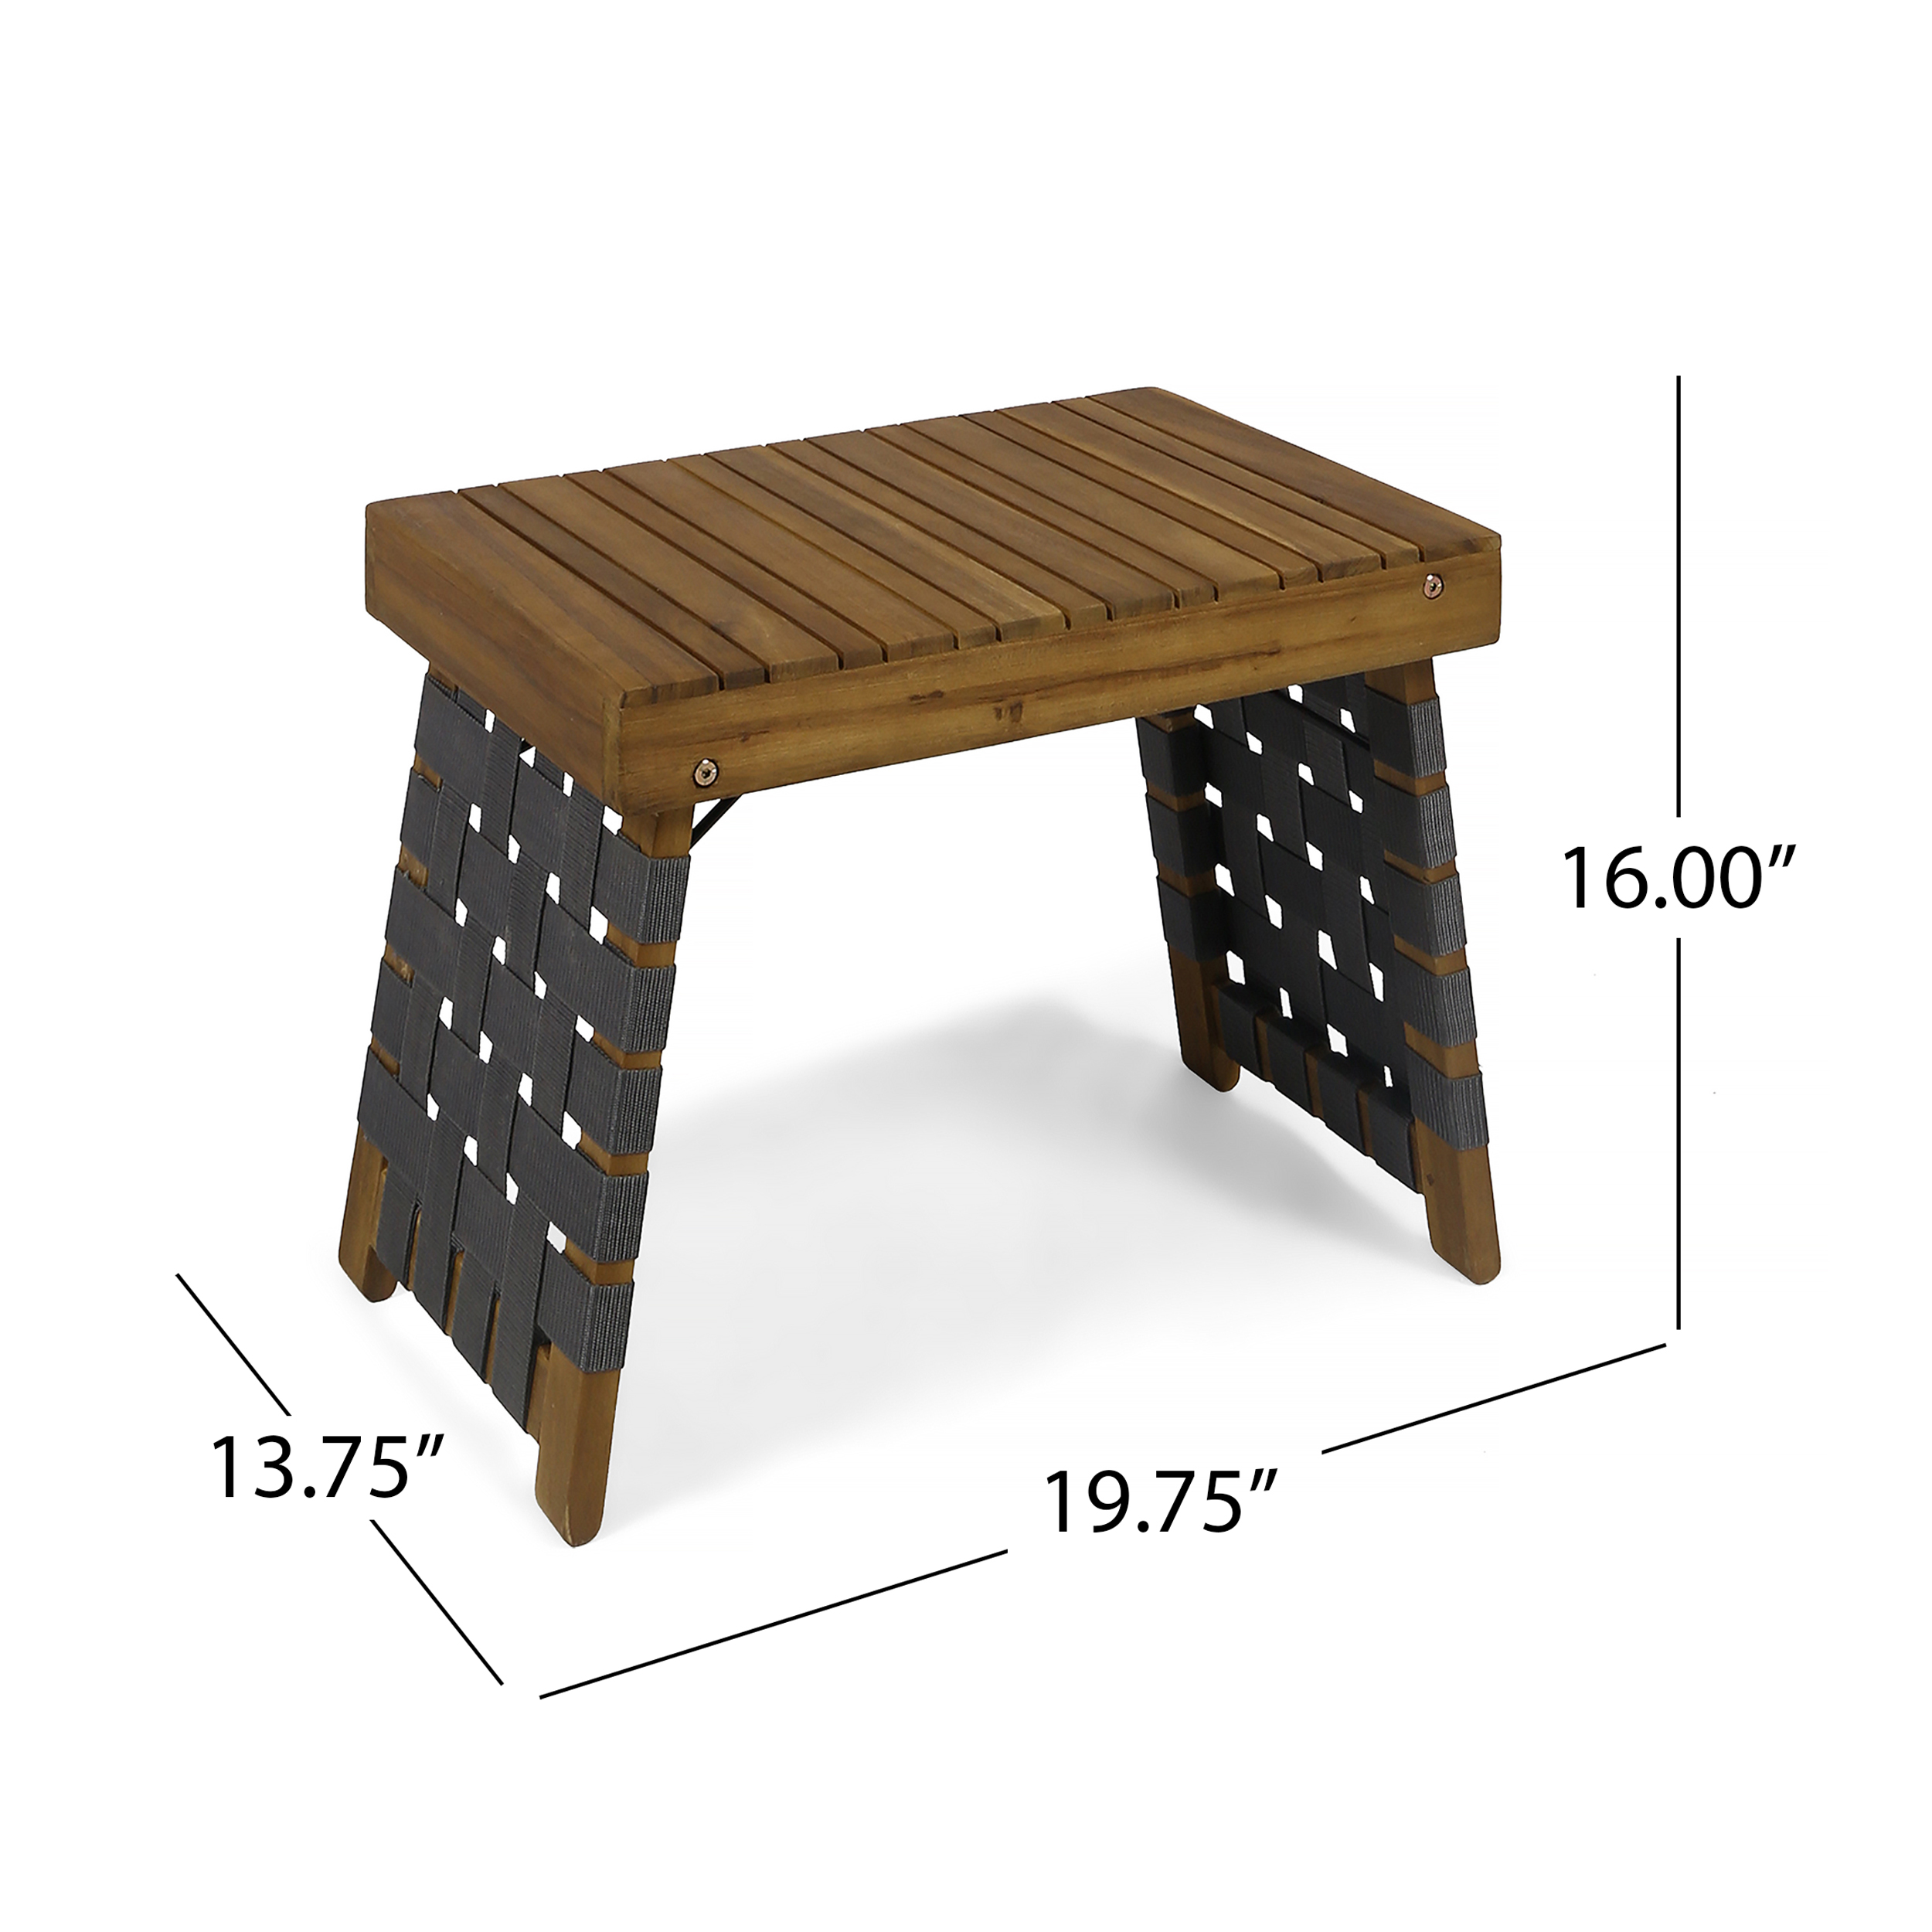 Bezalel Outdoor Acacia Wood Foldable Side Table, Brown Patina and Gray - image 2 of 5